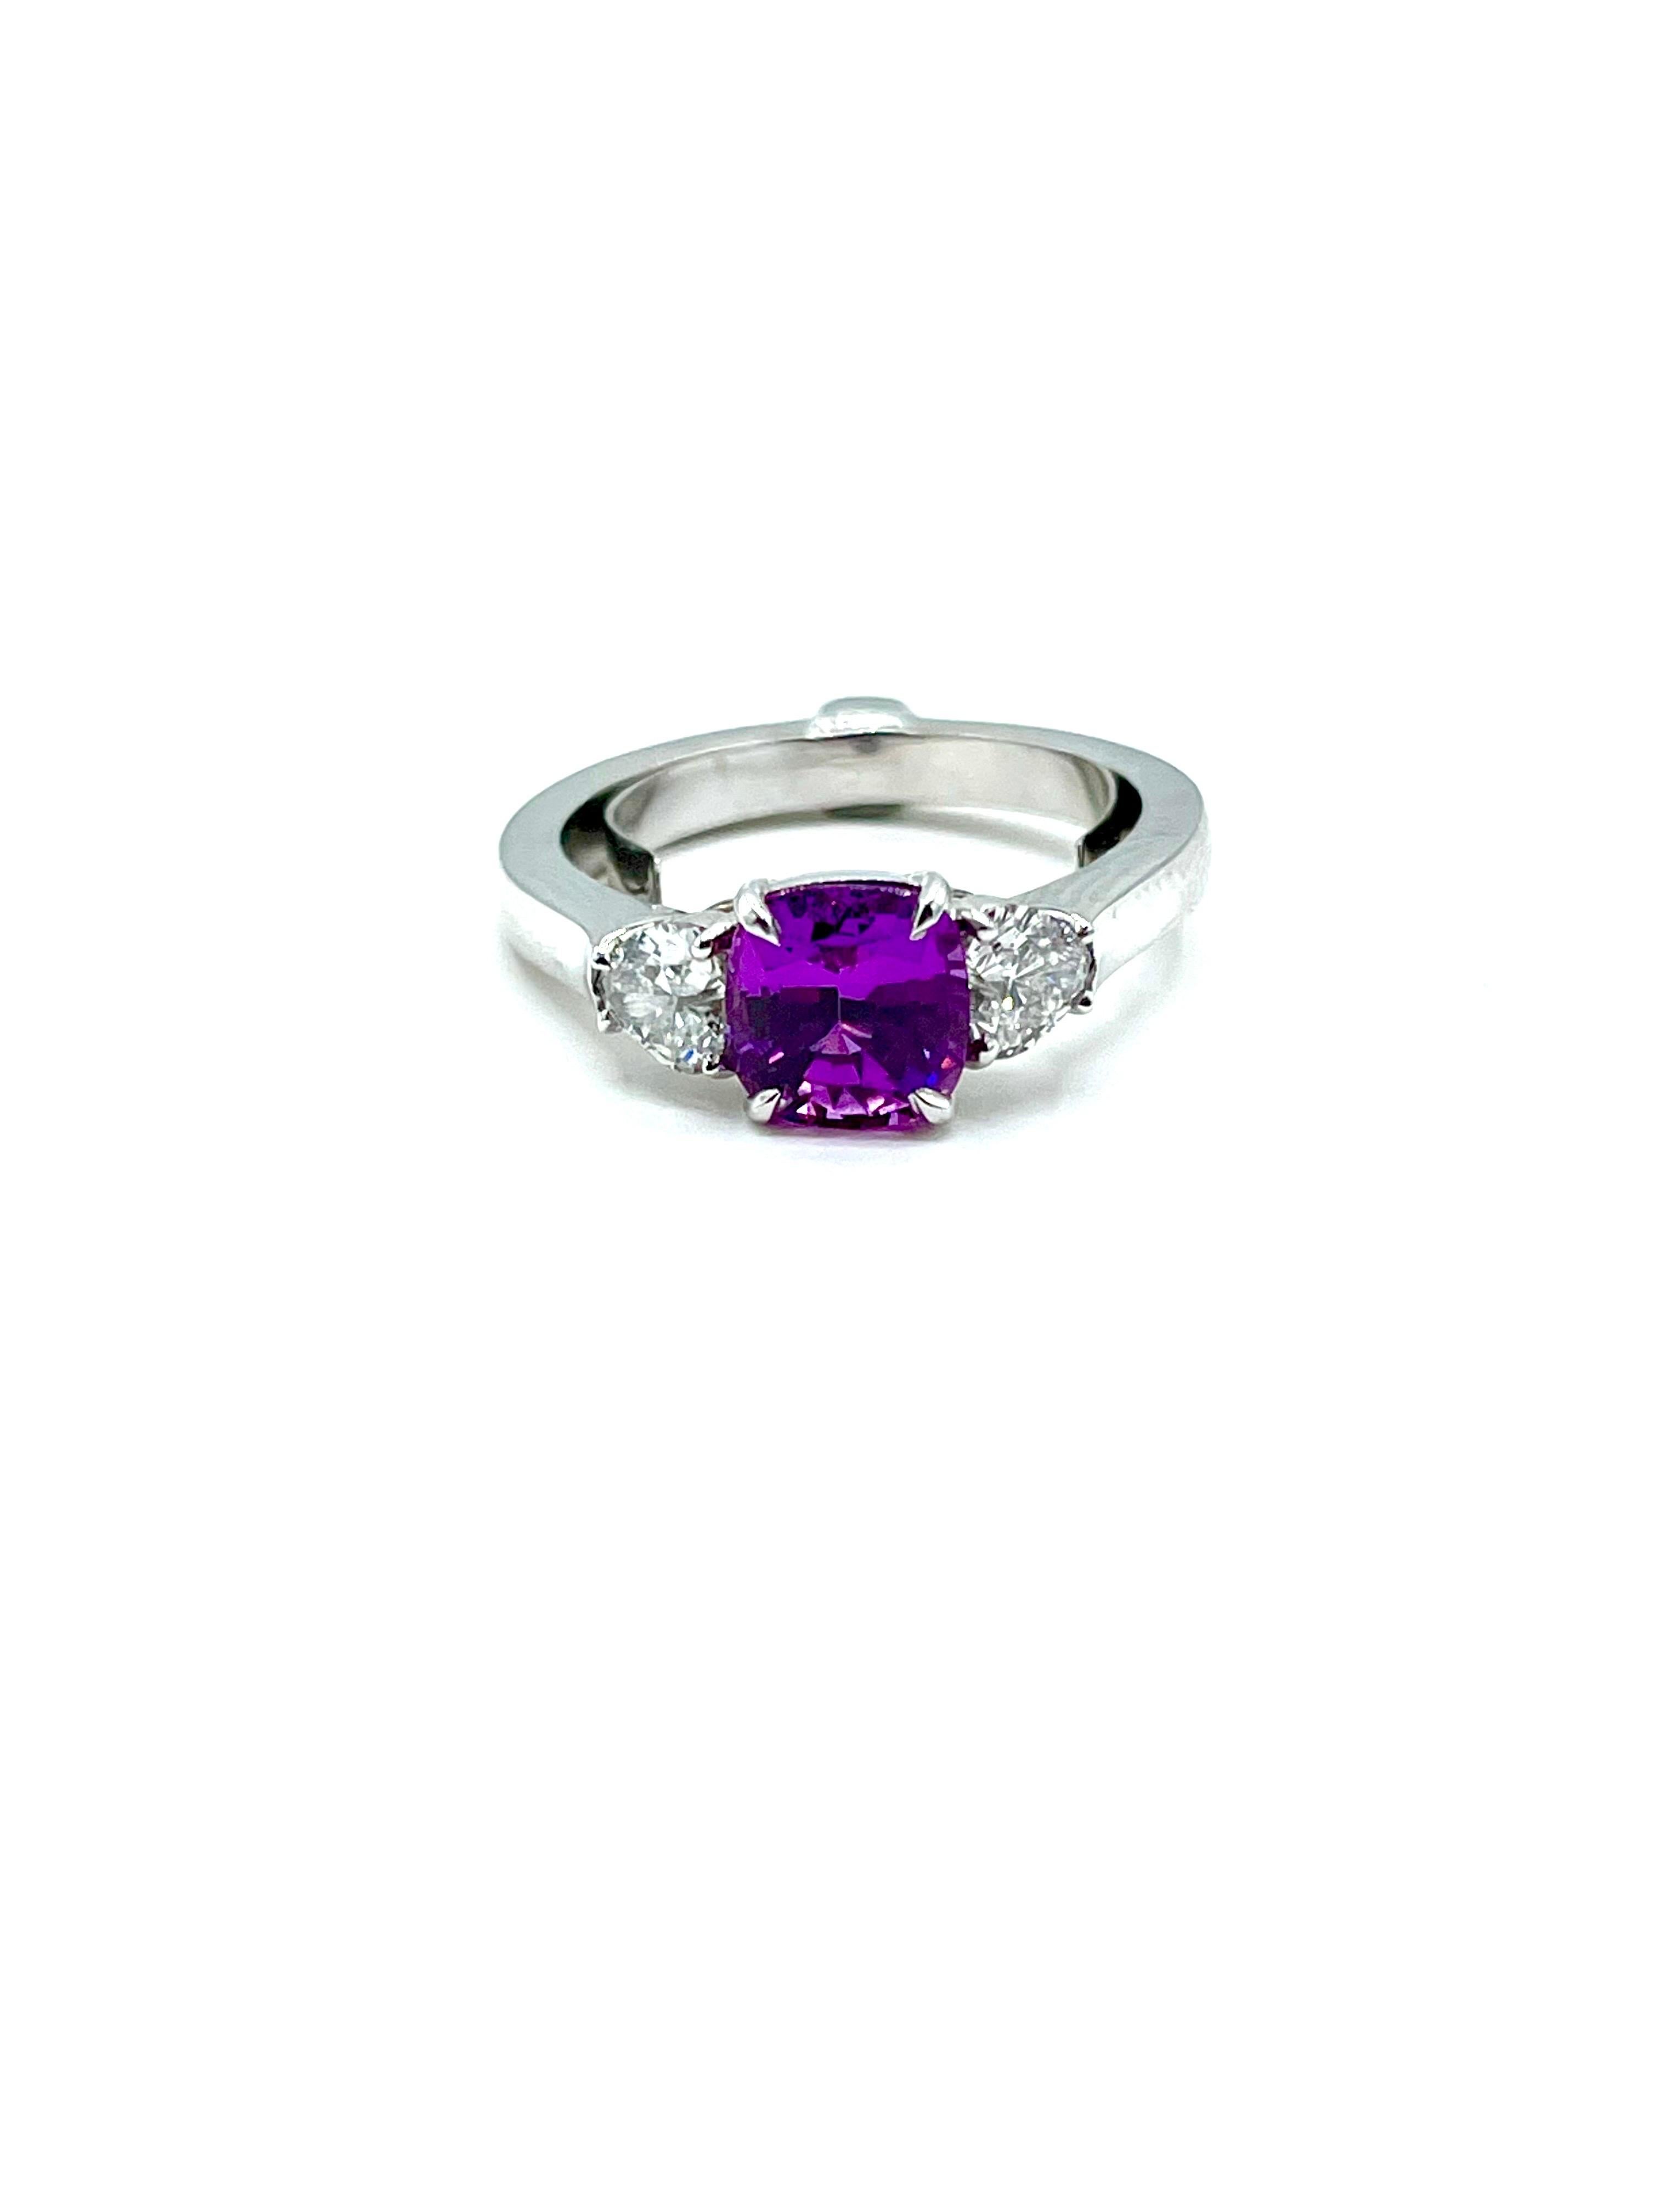 Women's or Men's Robert Procop 2.05 Carat Cushion Shaped Pink Sapphire and Diamond Ring For Sale